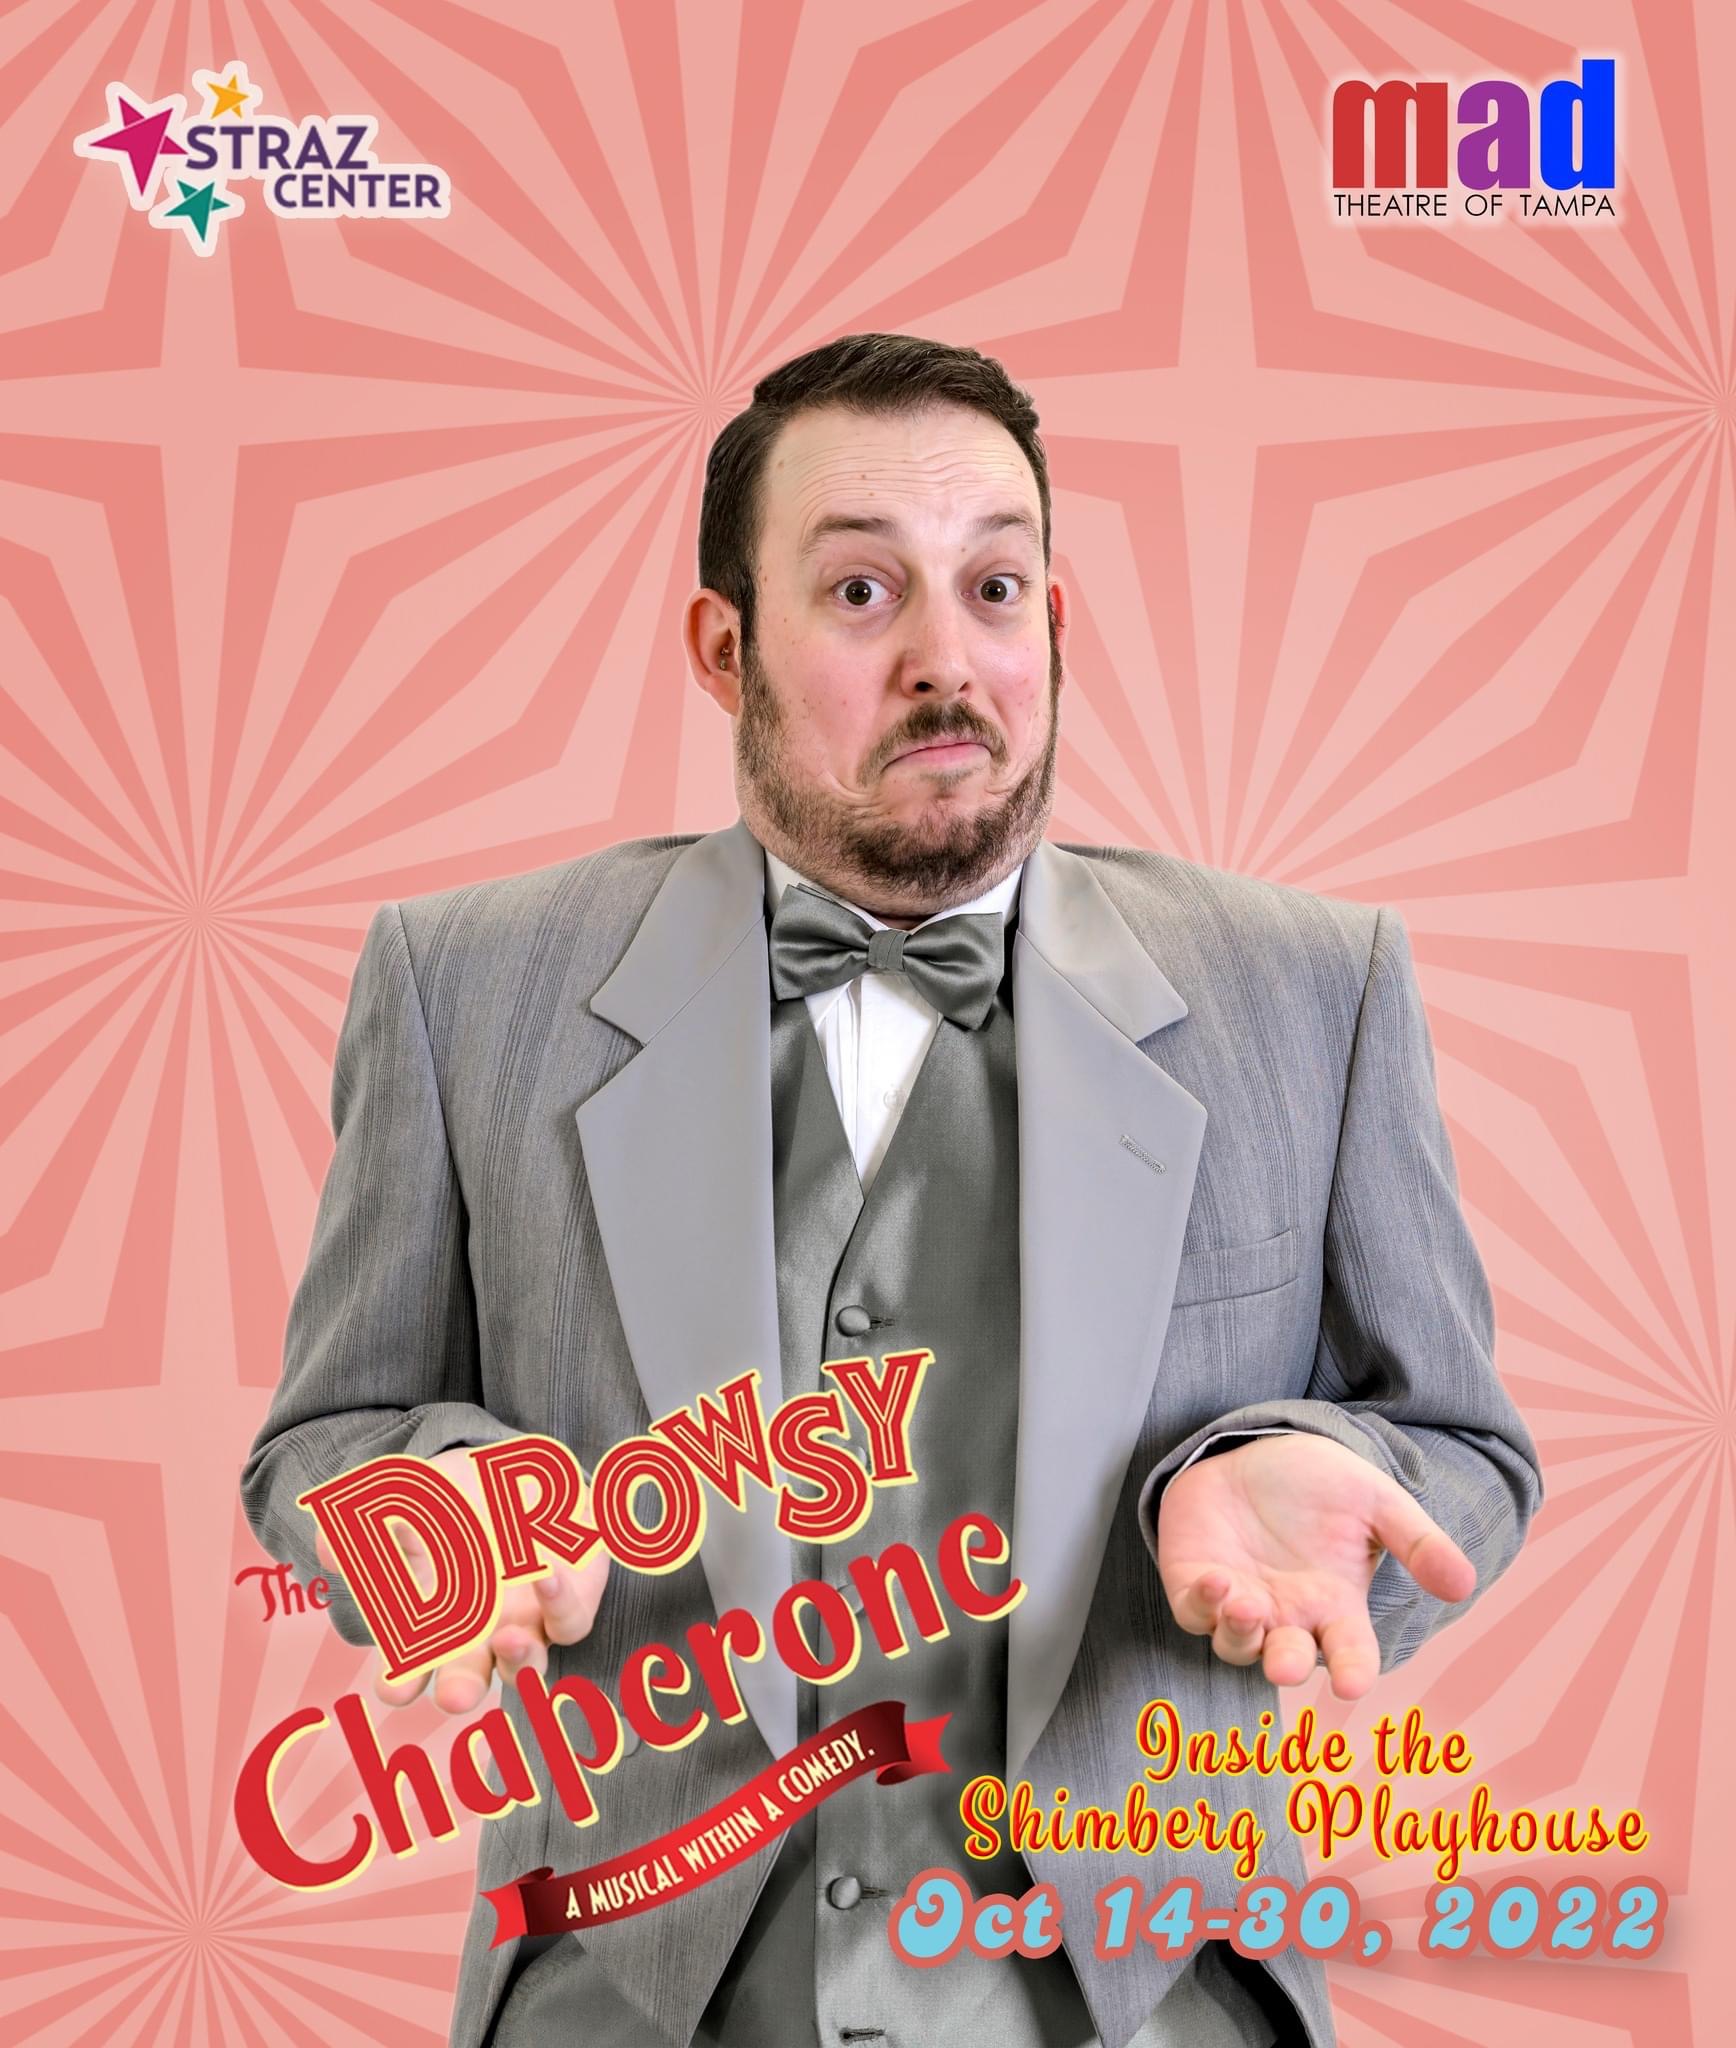 Meet George as played by Neil Bleiweiss in mad Theatre of Tampa’s “The Drowsy Chaperone